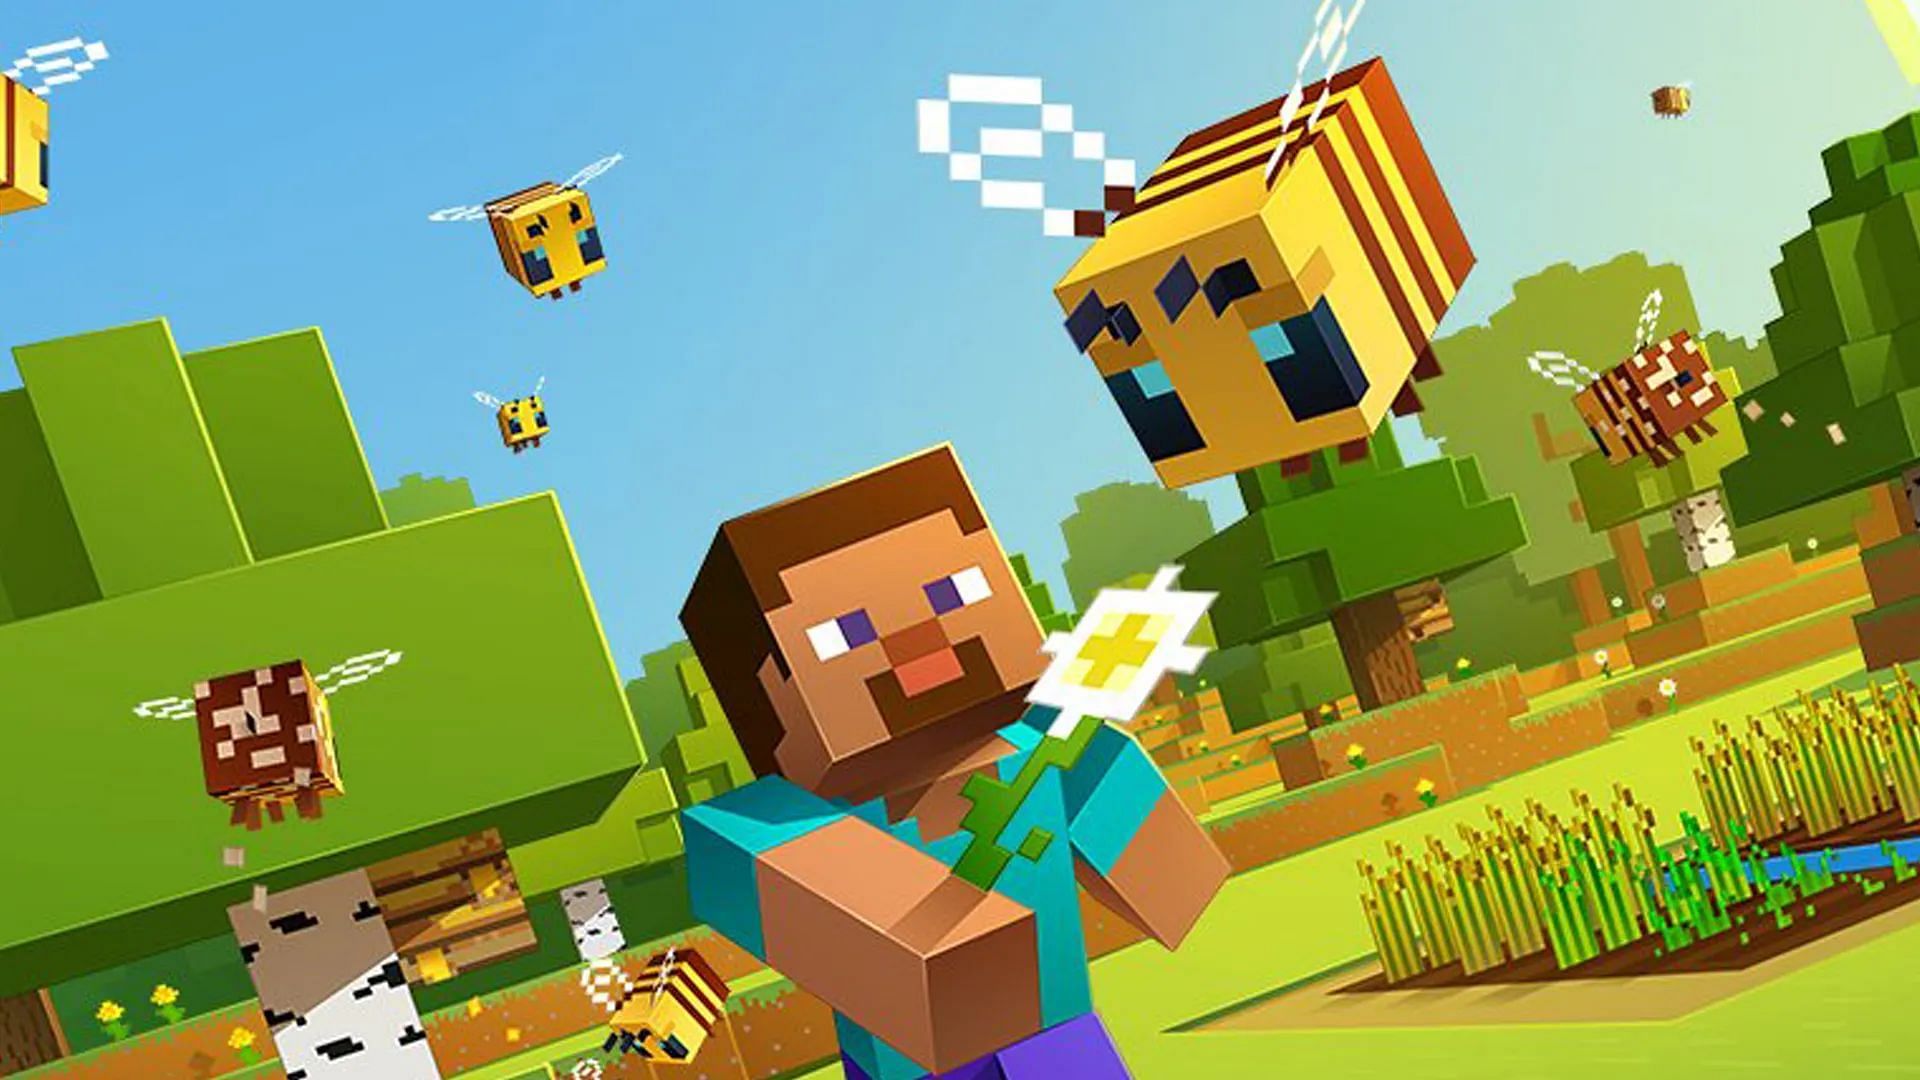 GameSpy: Minecraft 1.9 Pre-Release Leaked by Mojang - Page 1